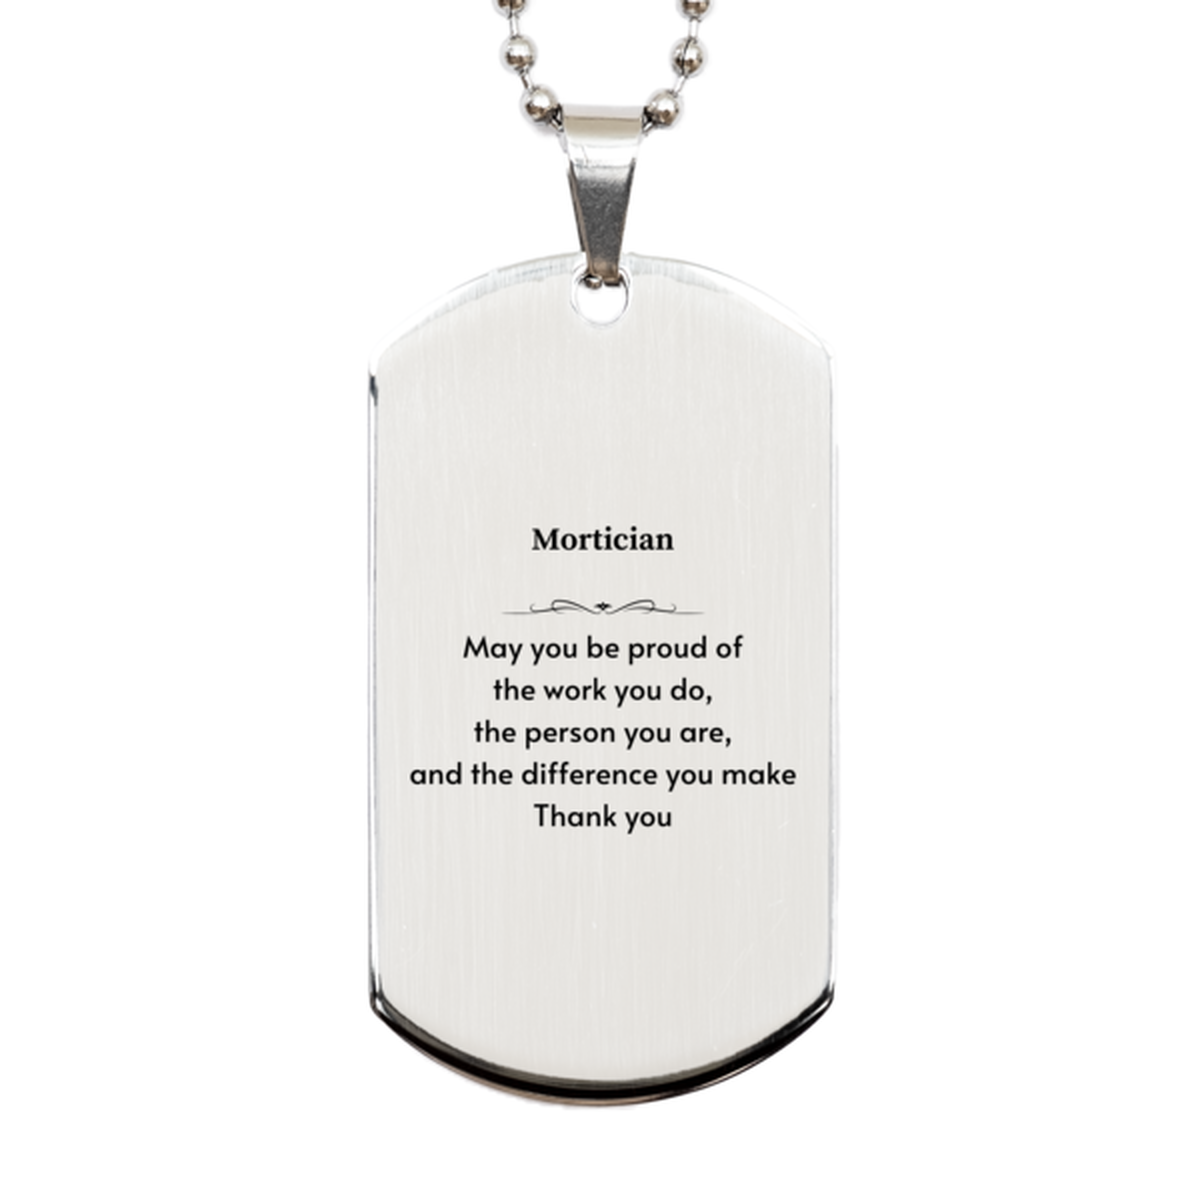 Heartwarming Silver Dog Tag Retirement Coworkers Gifts for Mortician, Mortician May You be proud of the work you do, the person you are Gifts for Boss Men Women Friends